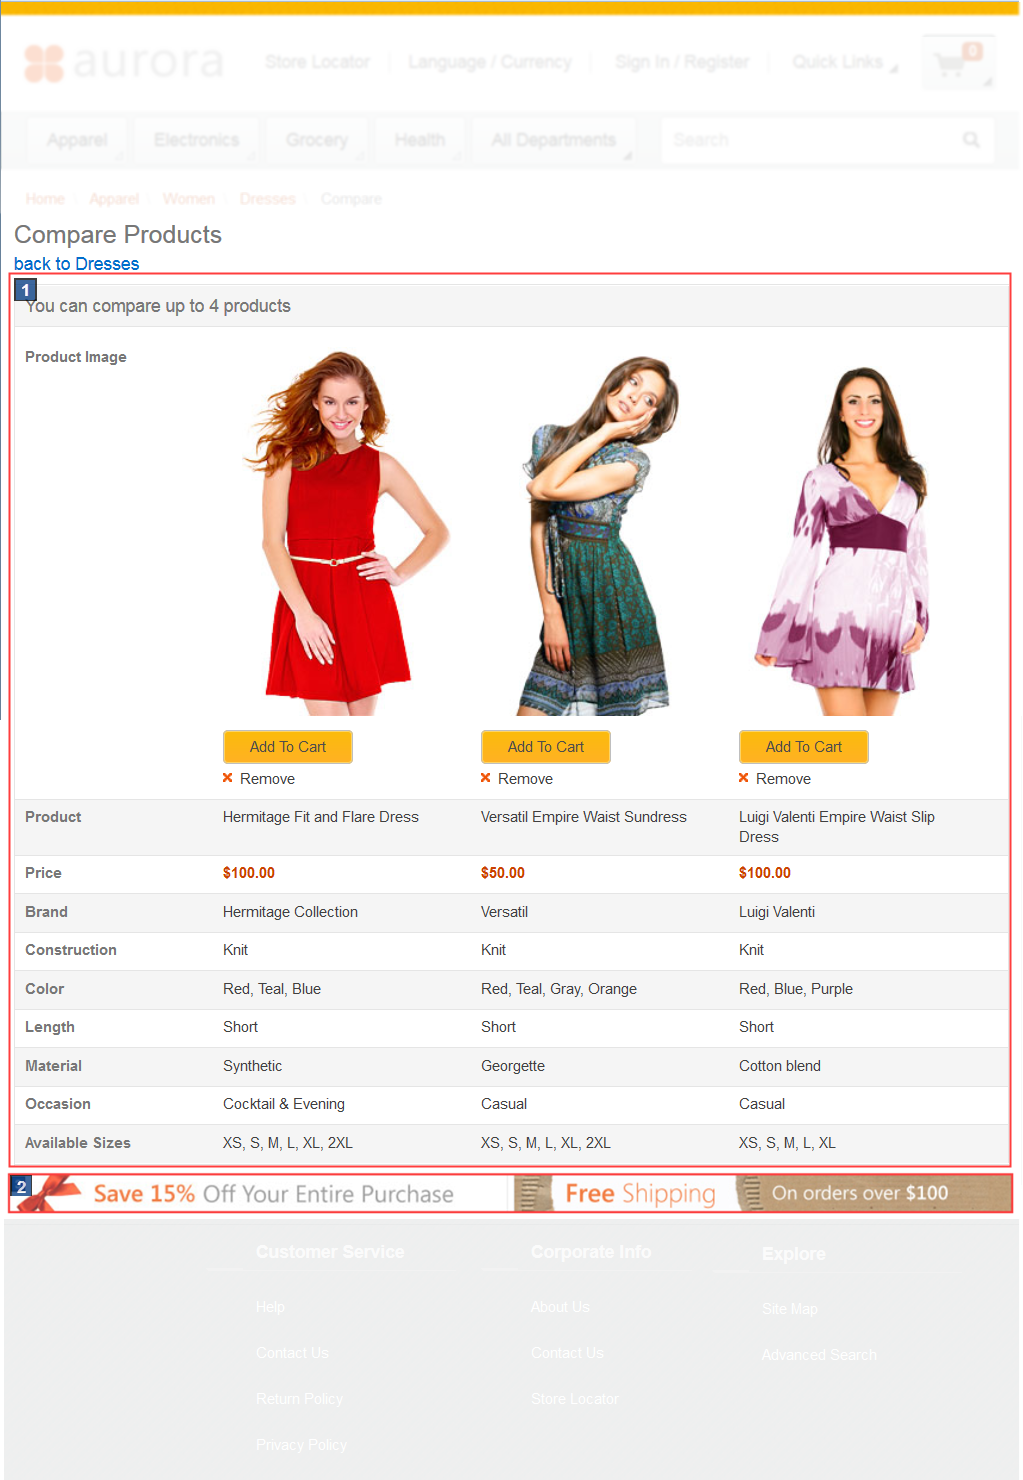 Compare Products page screen capture